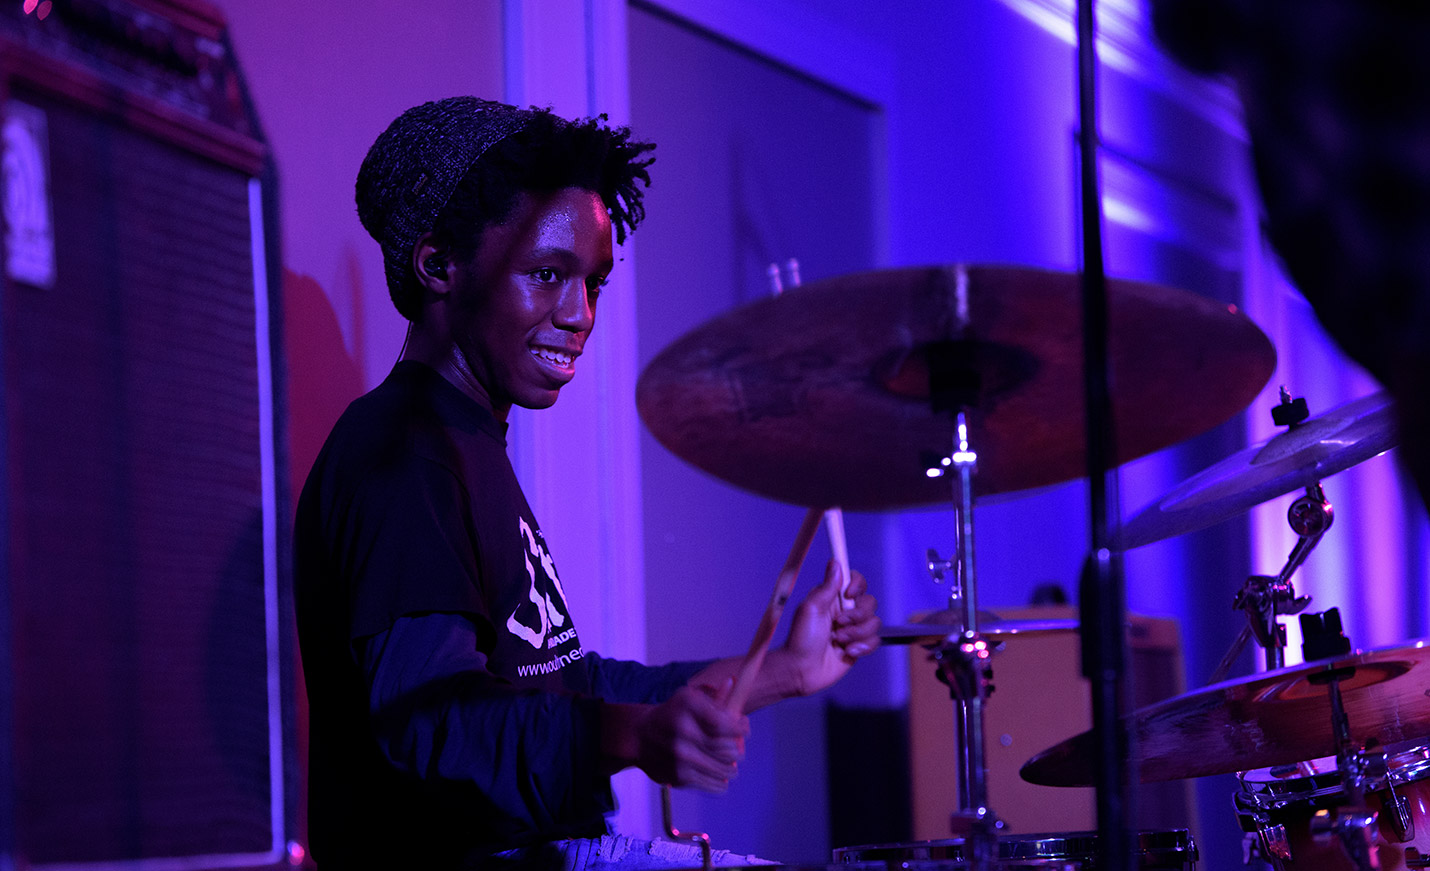 A drummer performing during a song